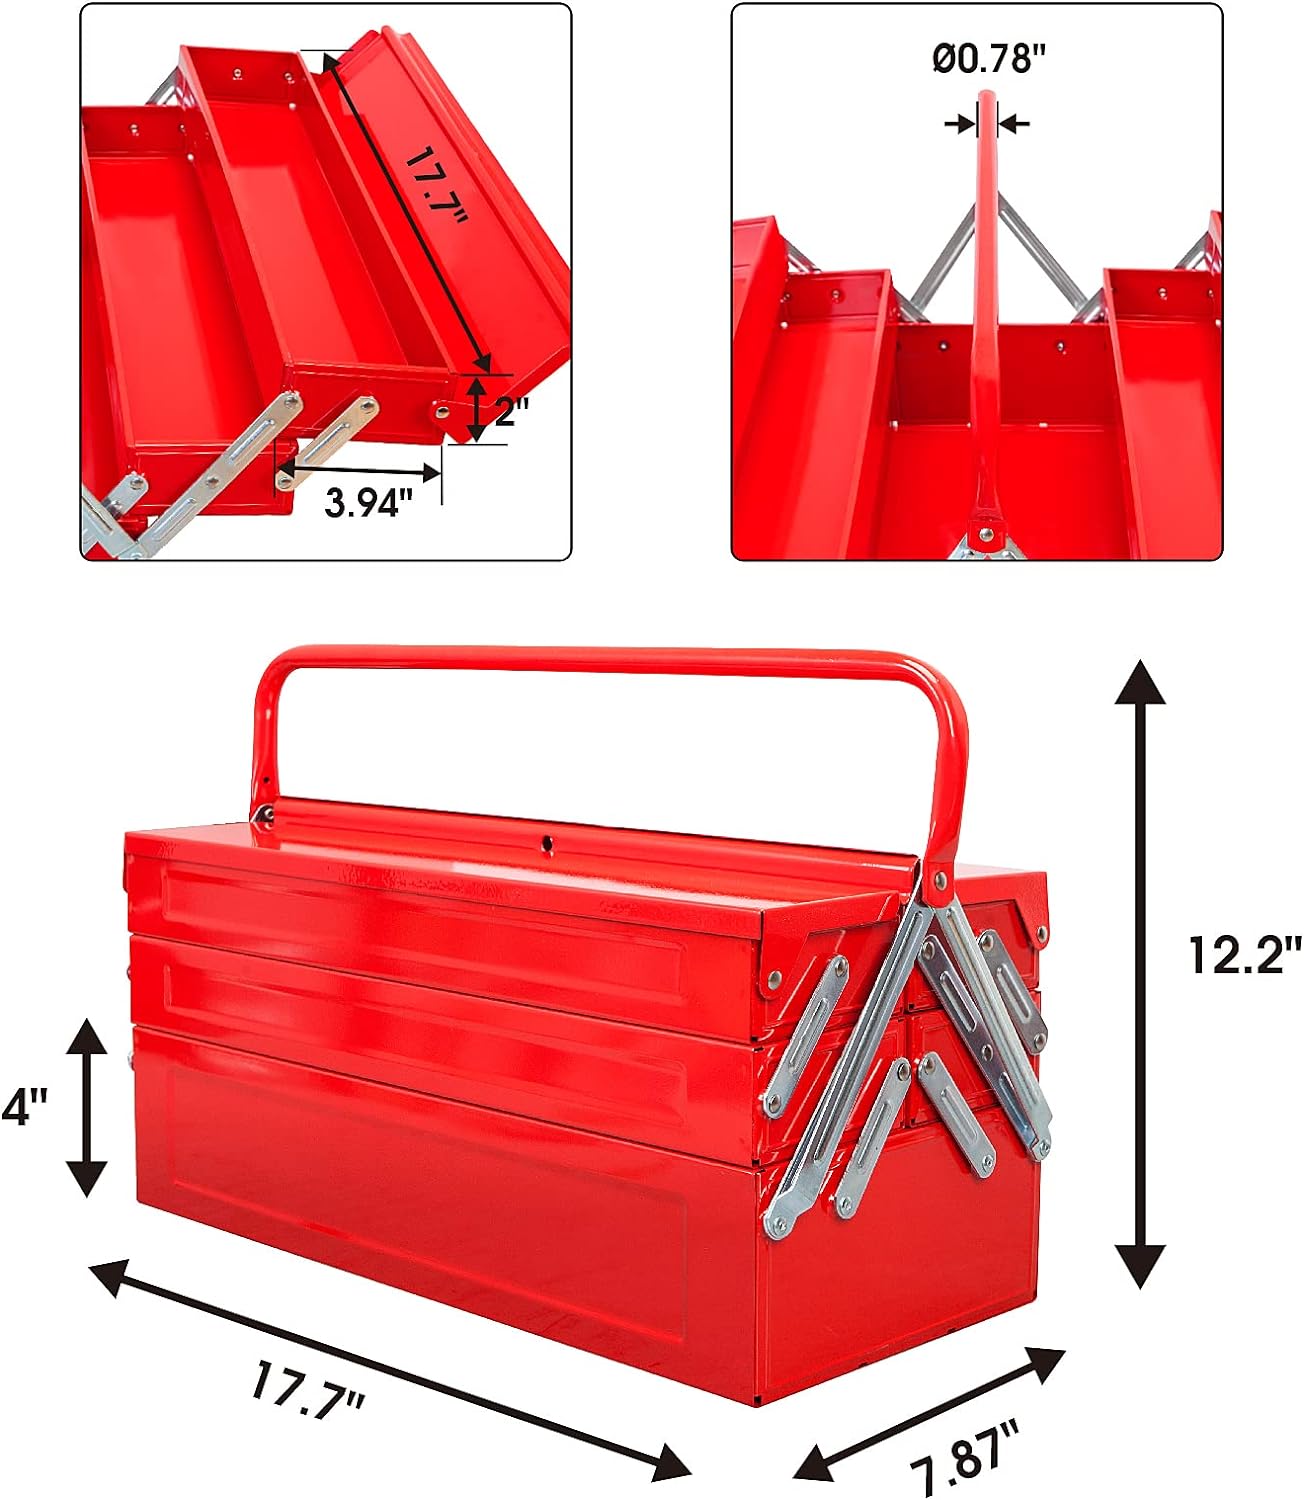 https://bigbigmart.com/wp-content/uploads/2023/10/BIG-RED-18-Tool-BoxPortable-Steel-Metal-Locking-Toolbox-Organizer-with-5-Cantilever-Tool-TraysANTBC-128RRed1.jpg